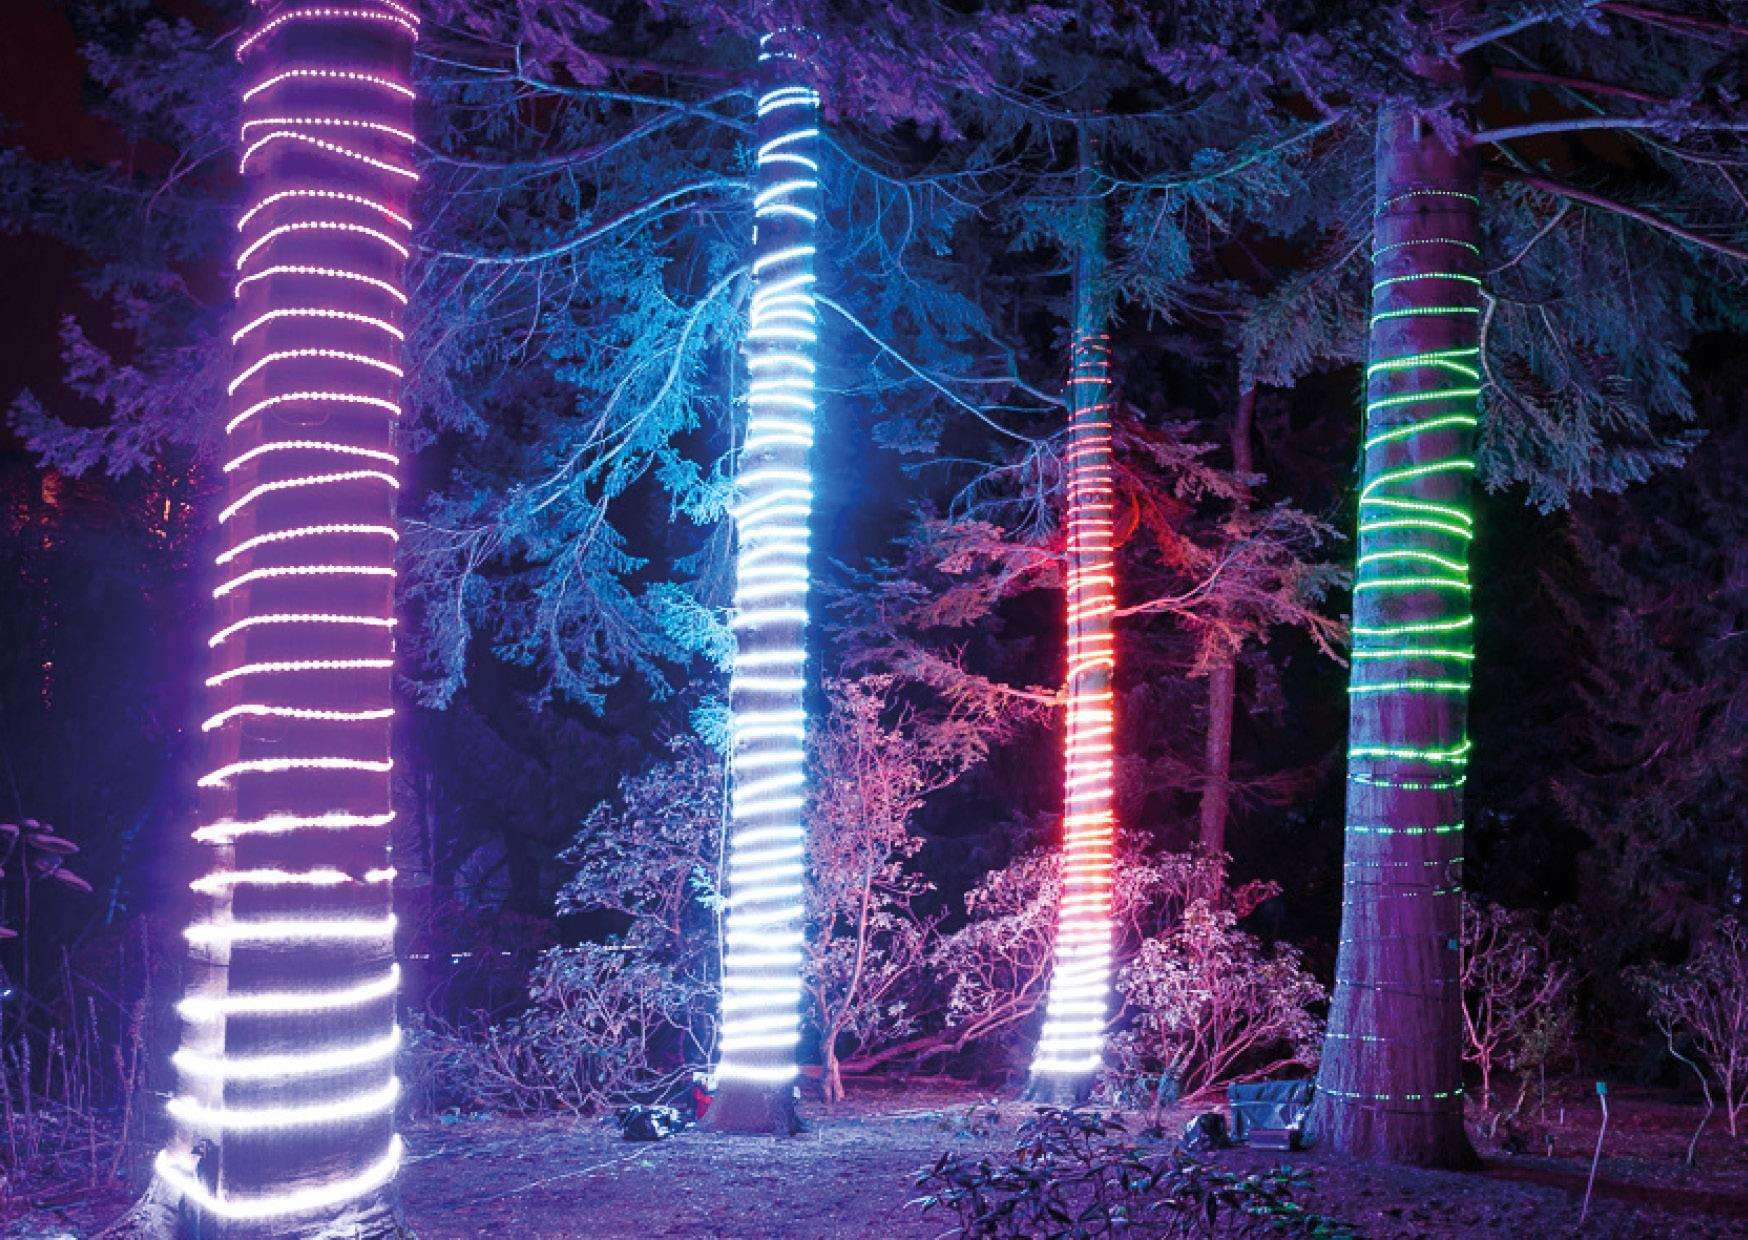 Forest of Festive Lights at Bedgebury Pinetum in Goudhurst